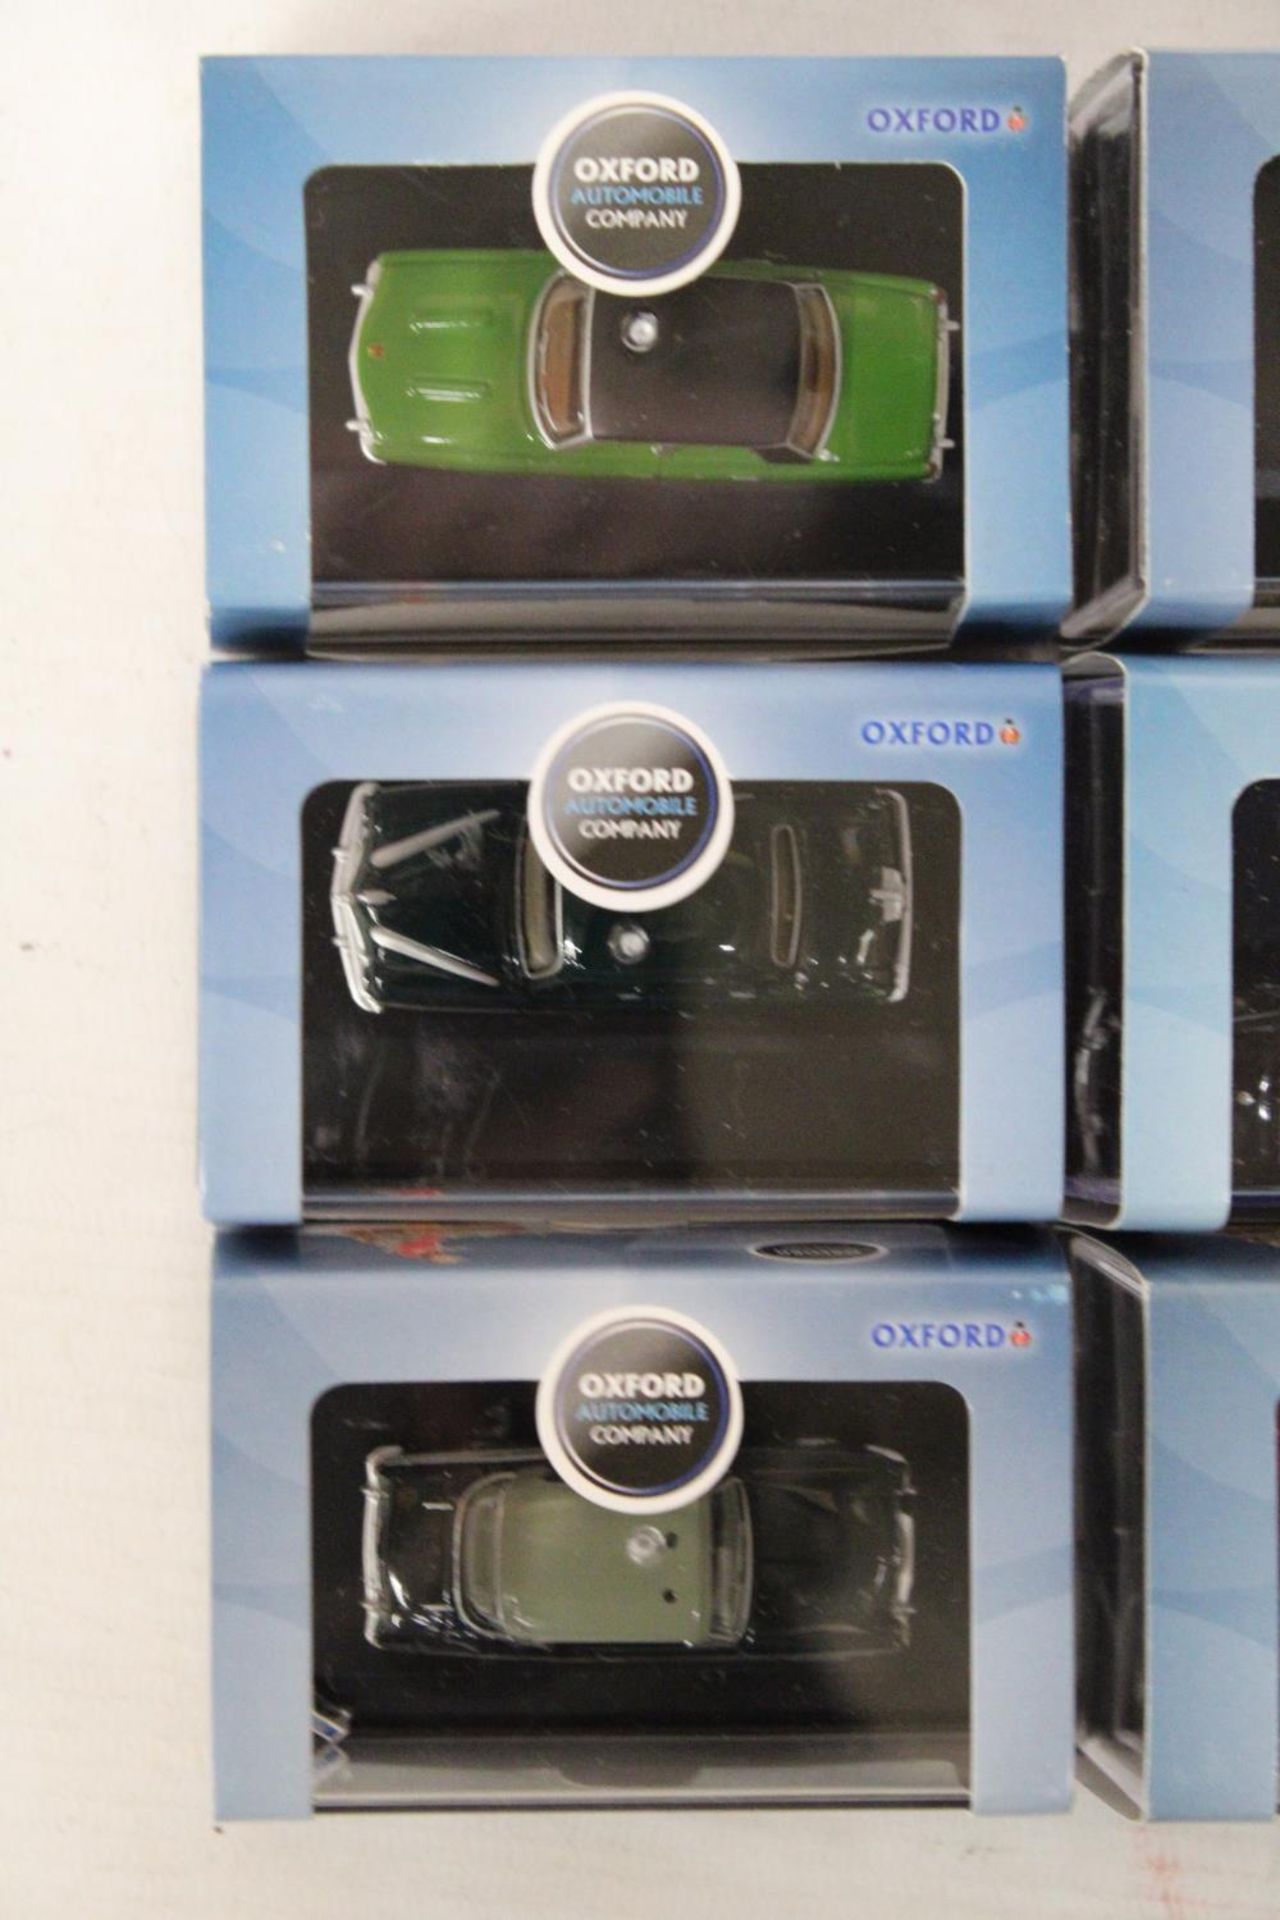 SIX VARIOUS AS NEW AND BOXED OXFORD AUTOMOBILE COMPANY VEHICLES - Image 7 of 8